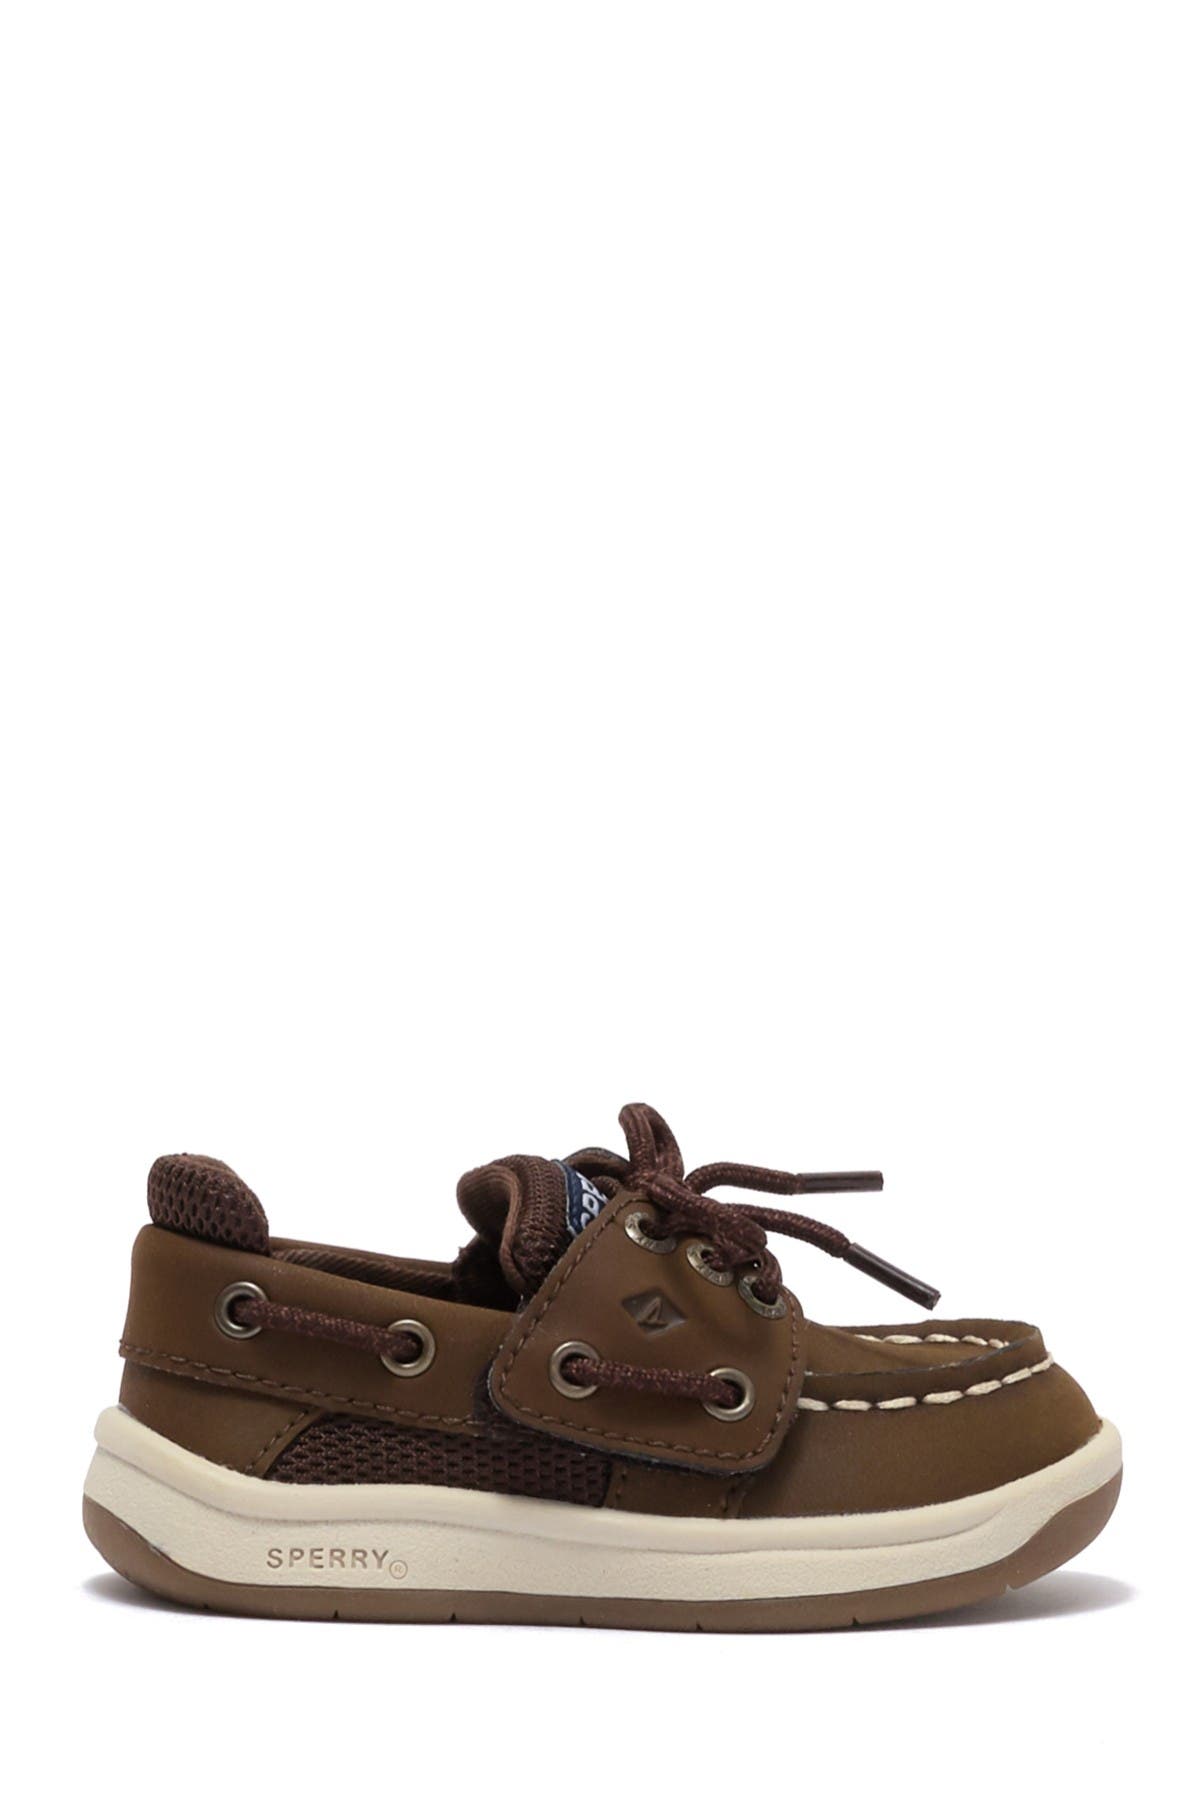 sperry convoy boat shoe